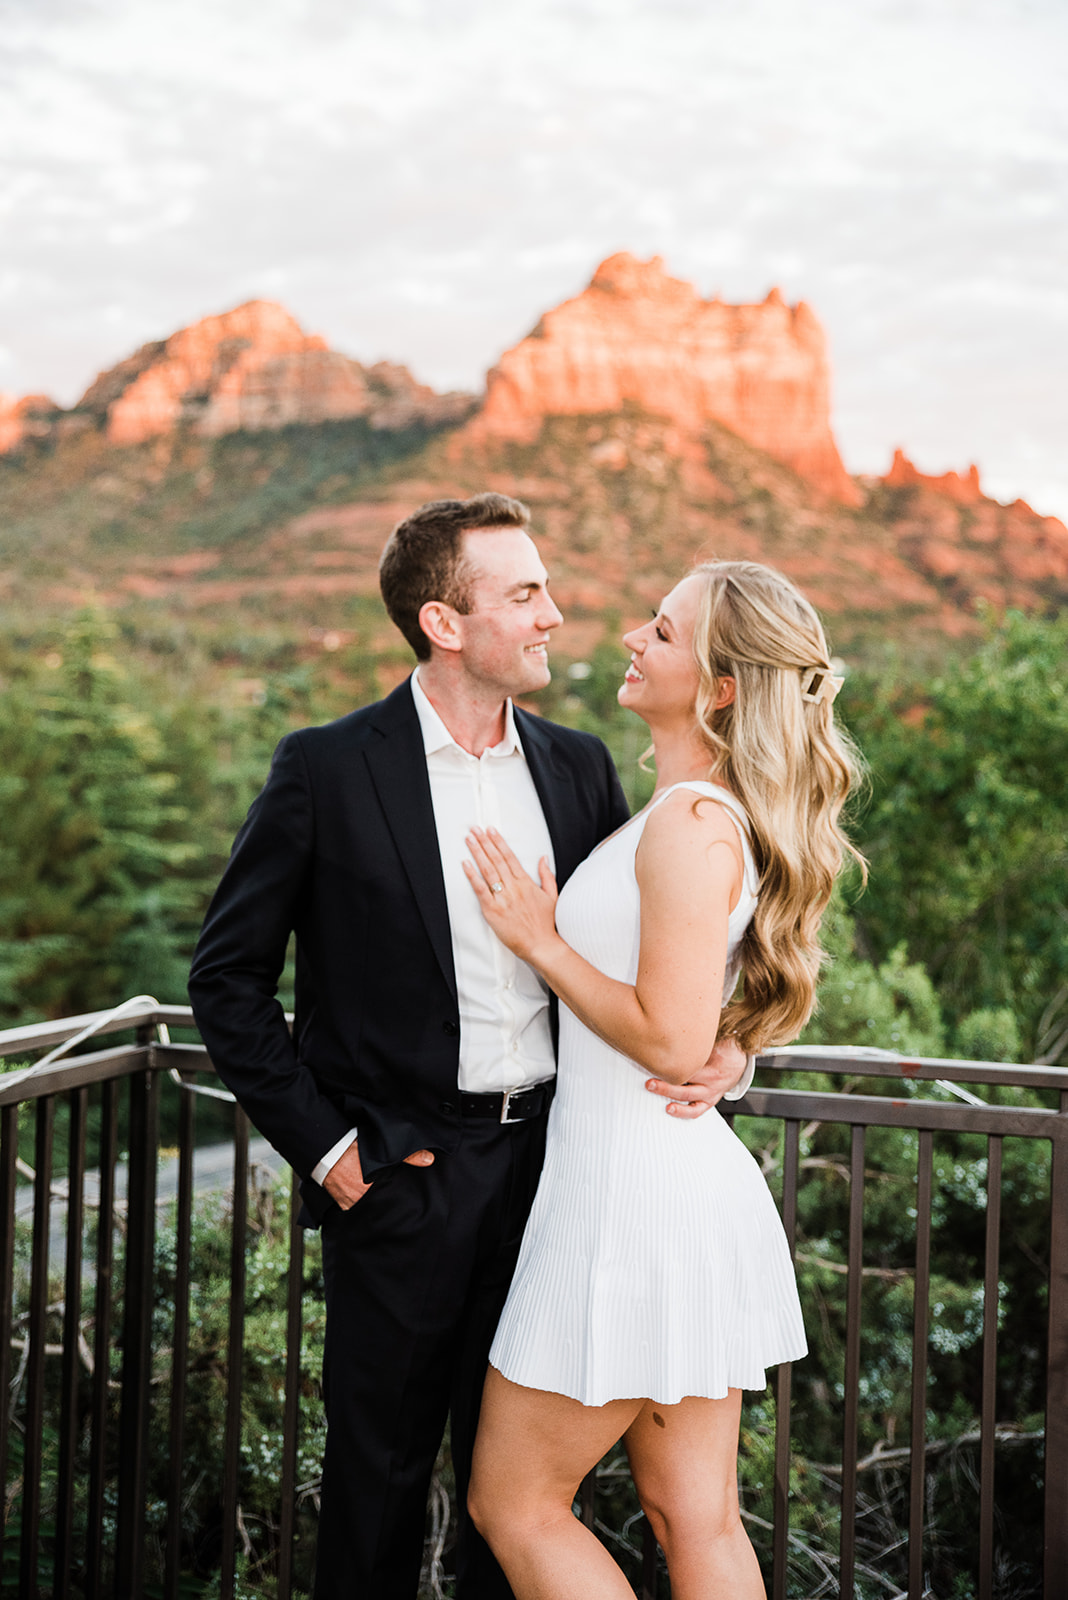 A man in a black suit smilies at his new fiance in a white dress at a desert mountain park after a The Yes Girls proposal